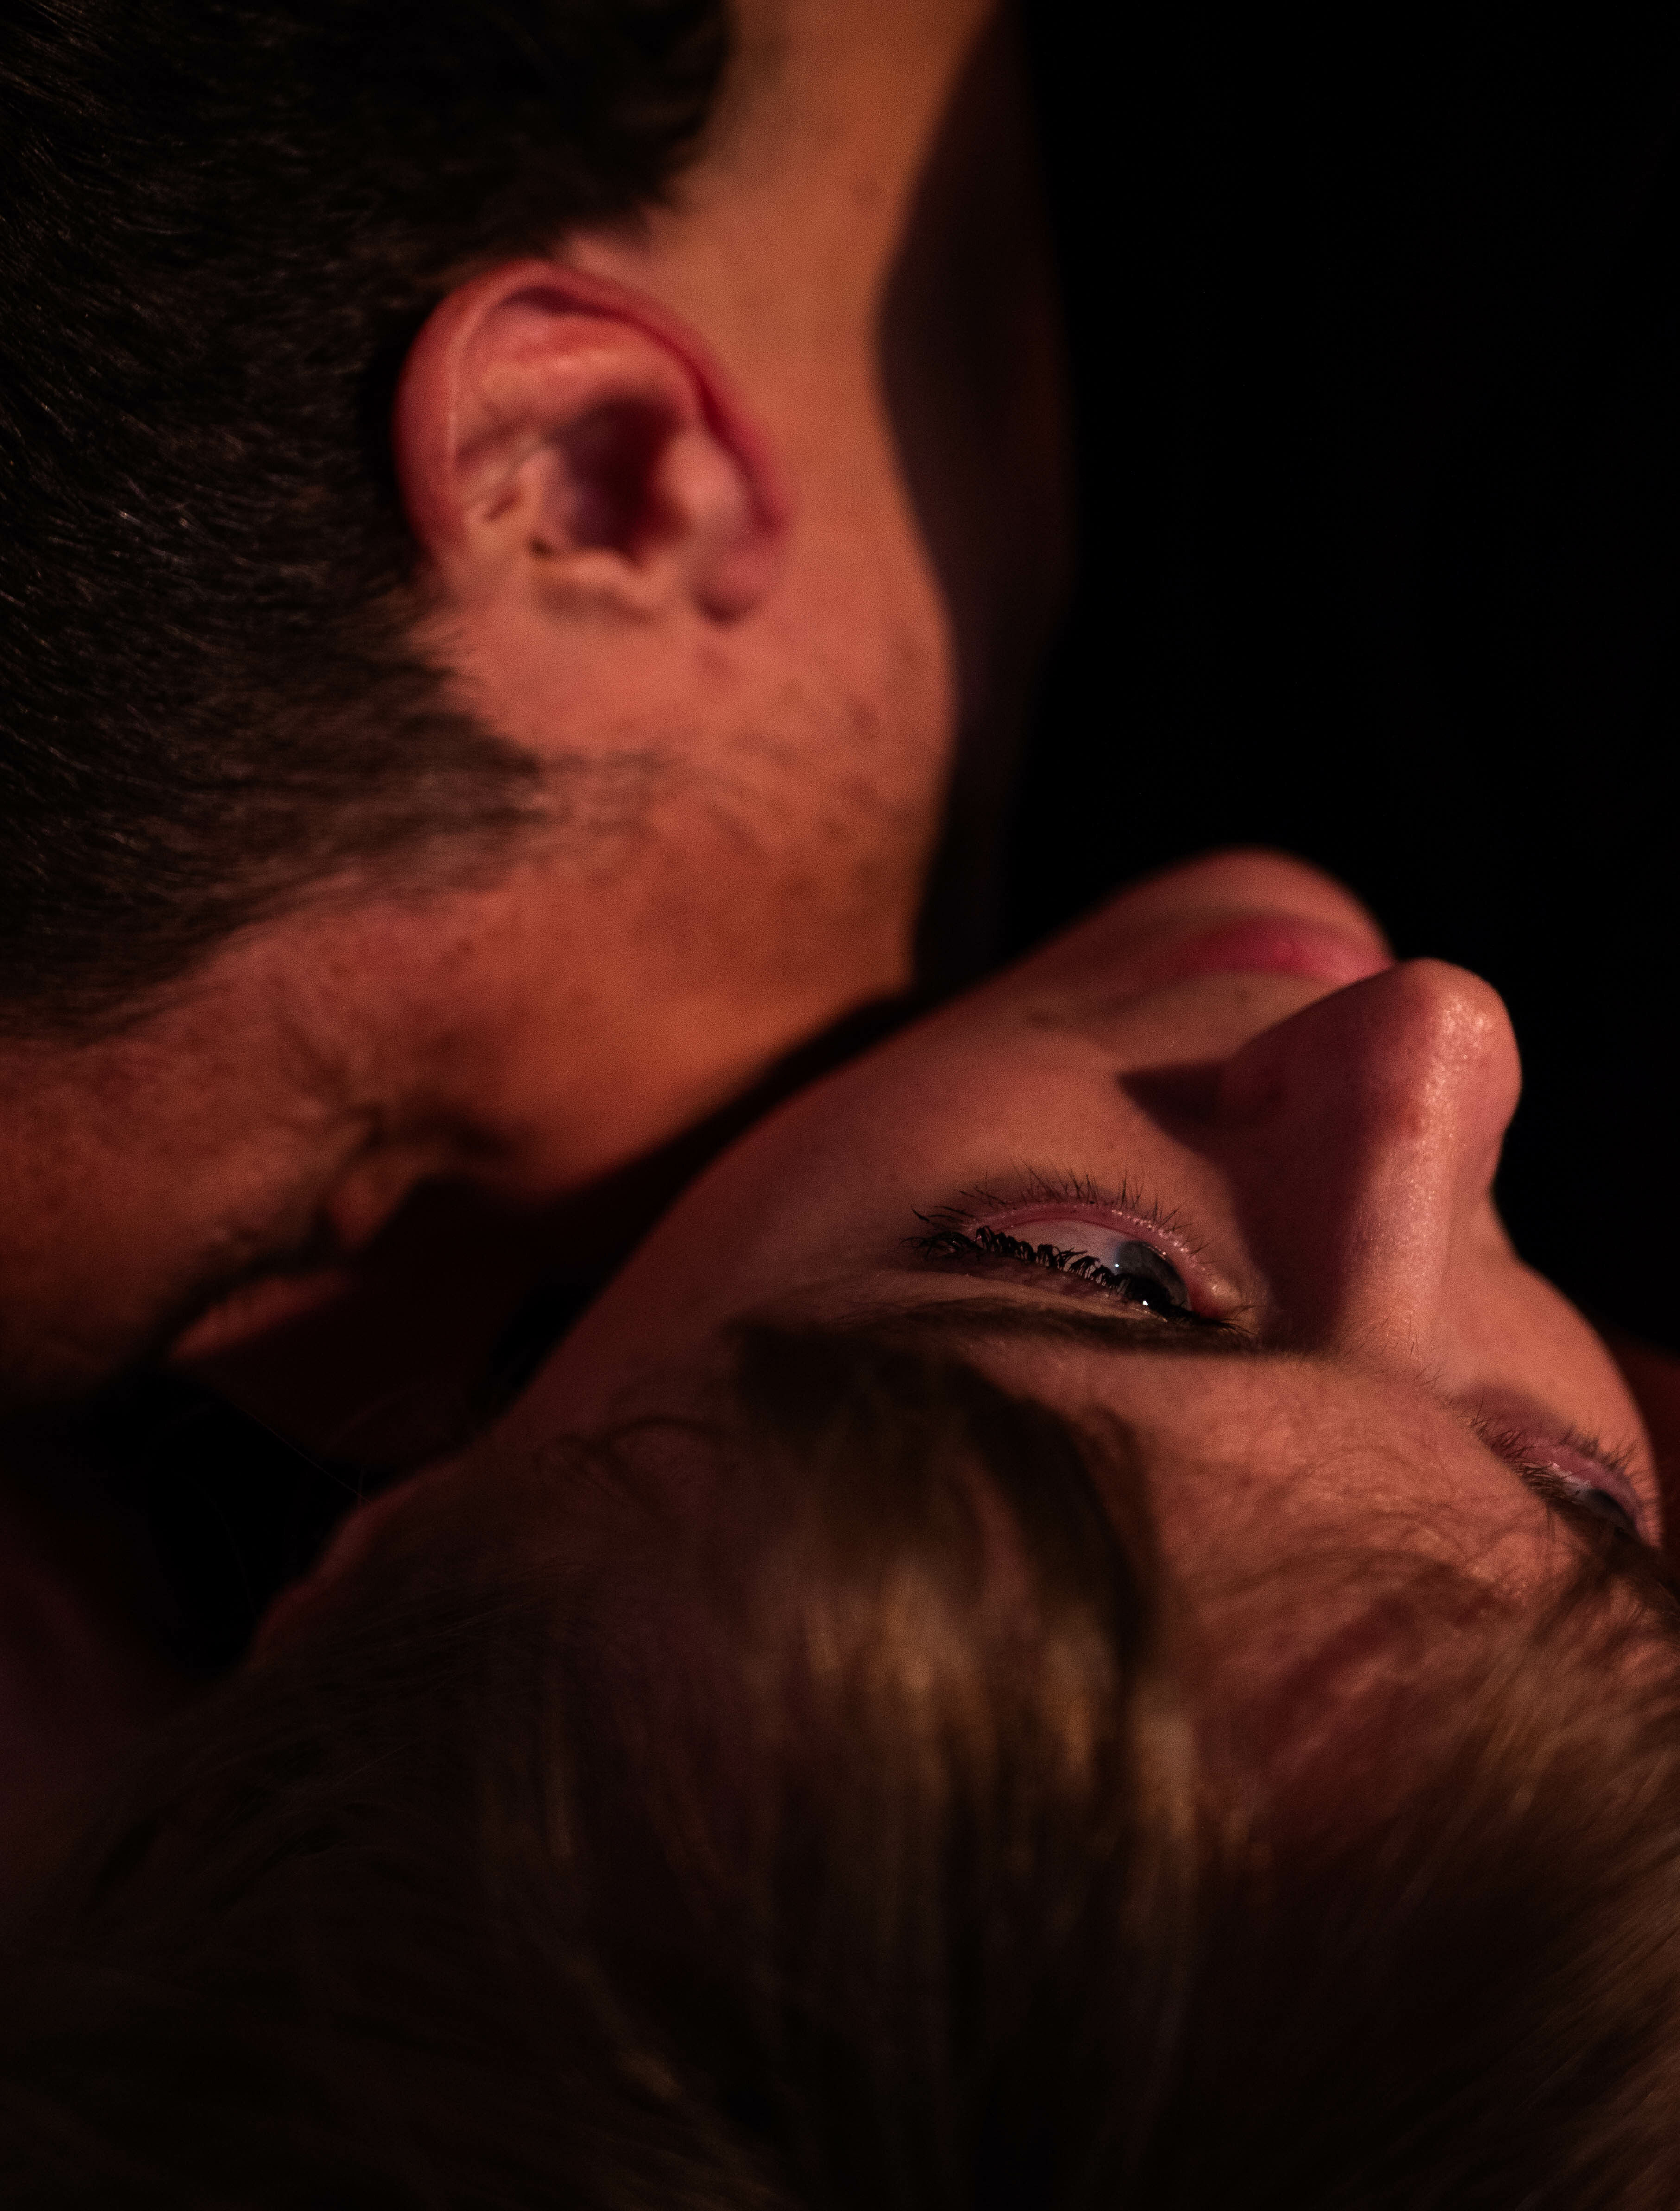 A close up shot of two people. One person's head is rolled back, while the other's face is tucked into the neck of their partner, only showing the side of their head and ear.